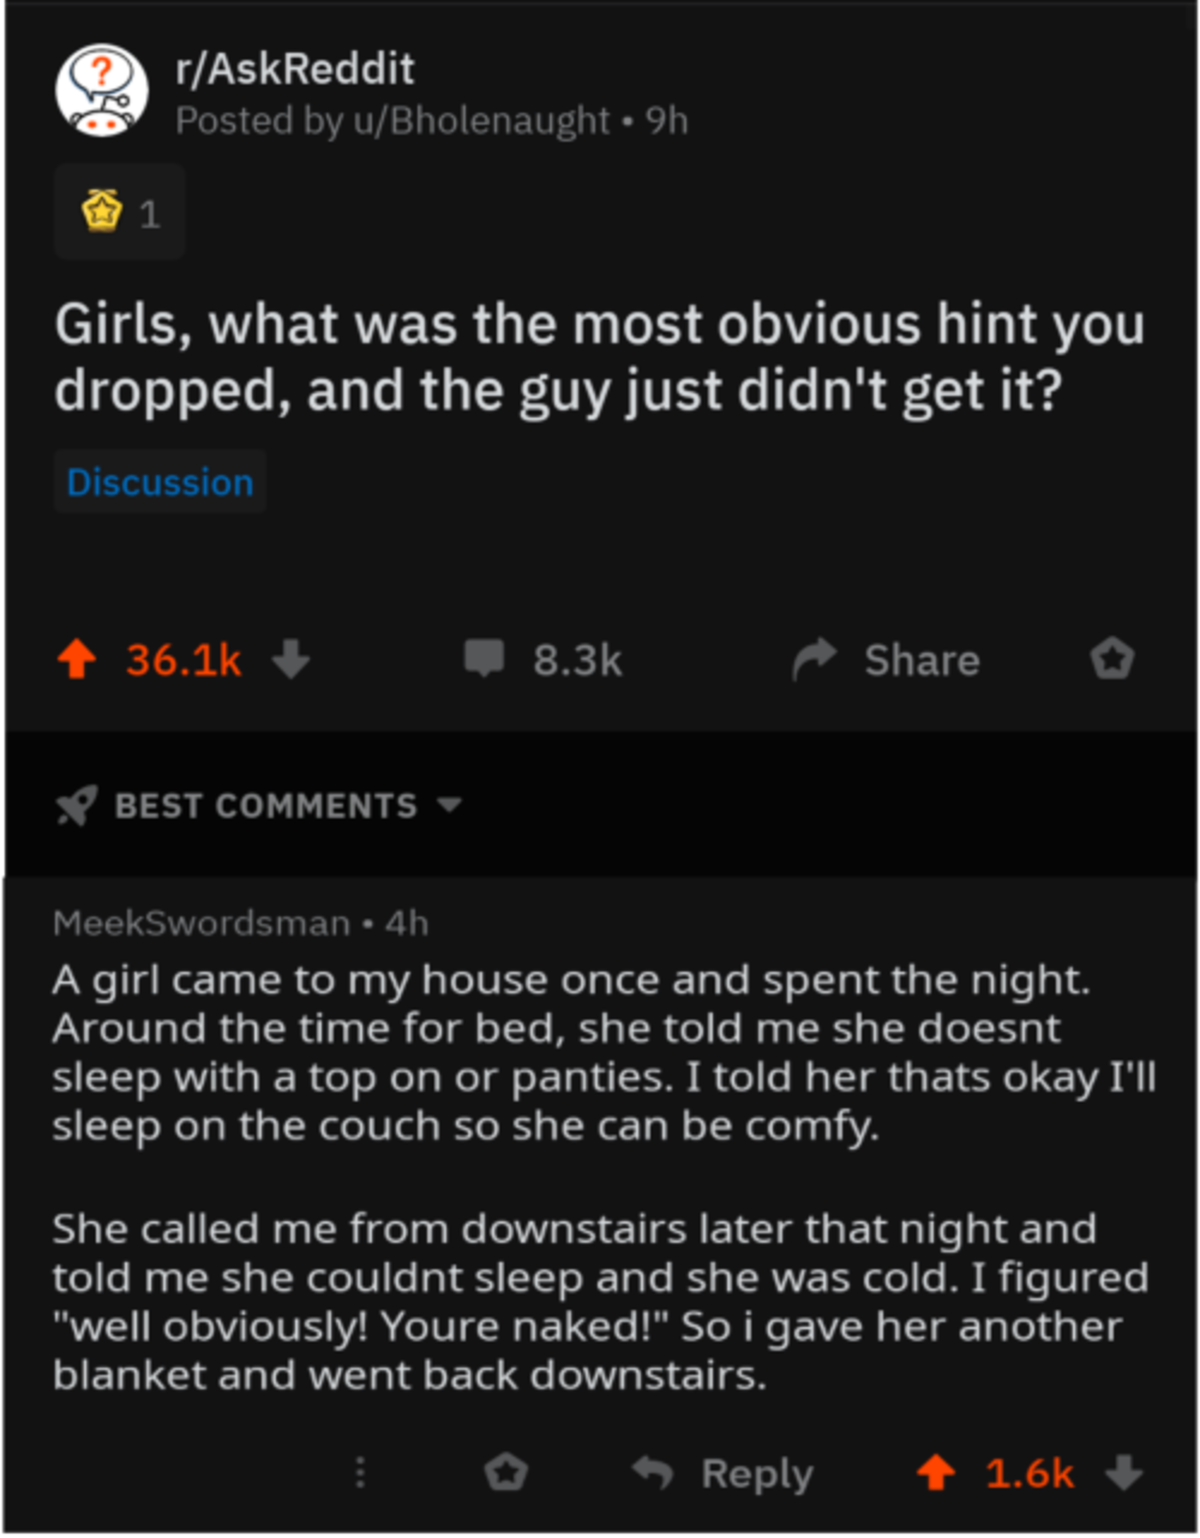 screenshot - rAskReddit Posted by uBholenaught 9h Girls, what was the most obvious hint you dropped, and the guy just didn't get it? Discussion o Best Meekswordsman. 4h A girl came to my house once and spent the night. Around the time for bed, she told me